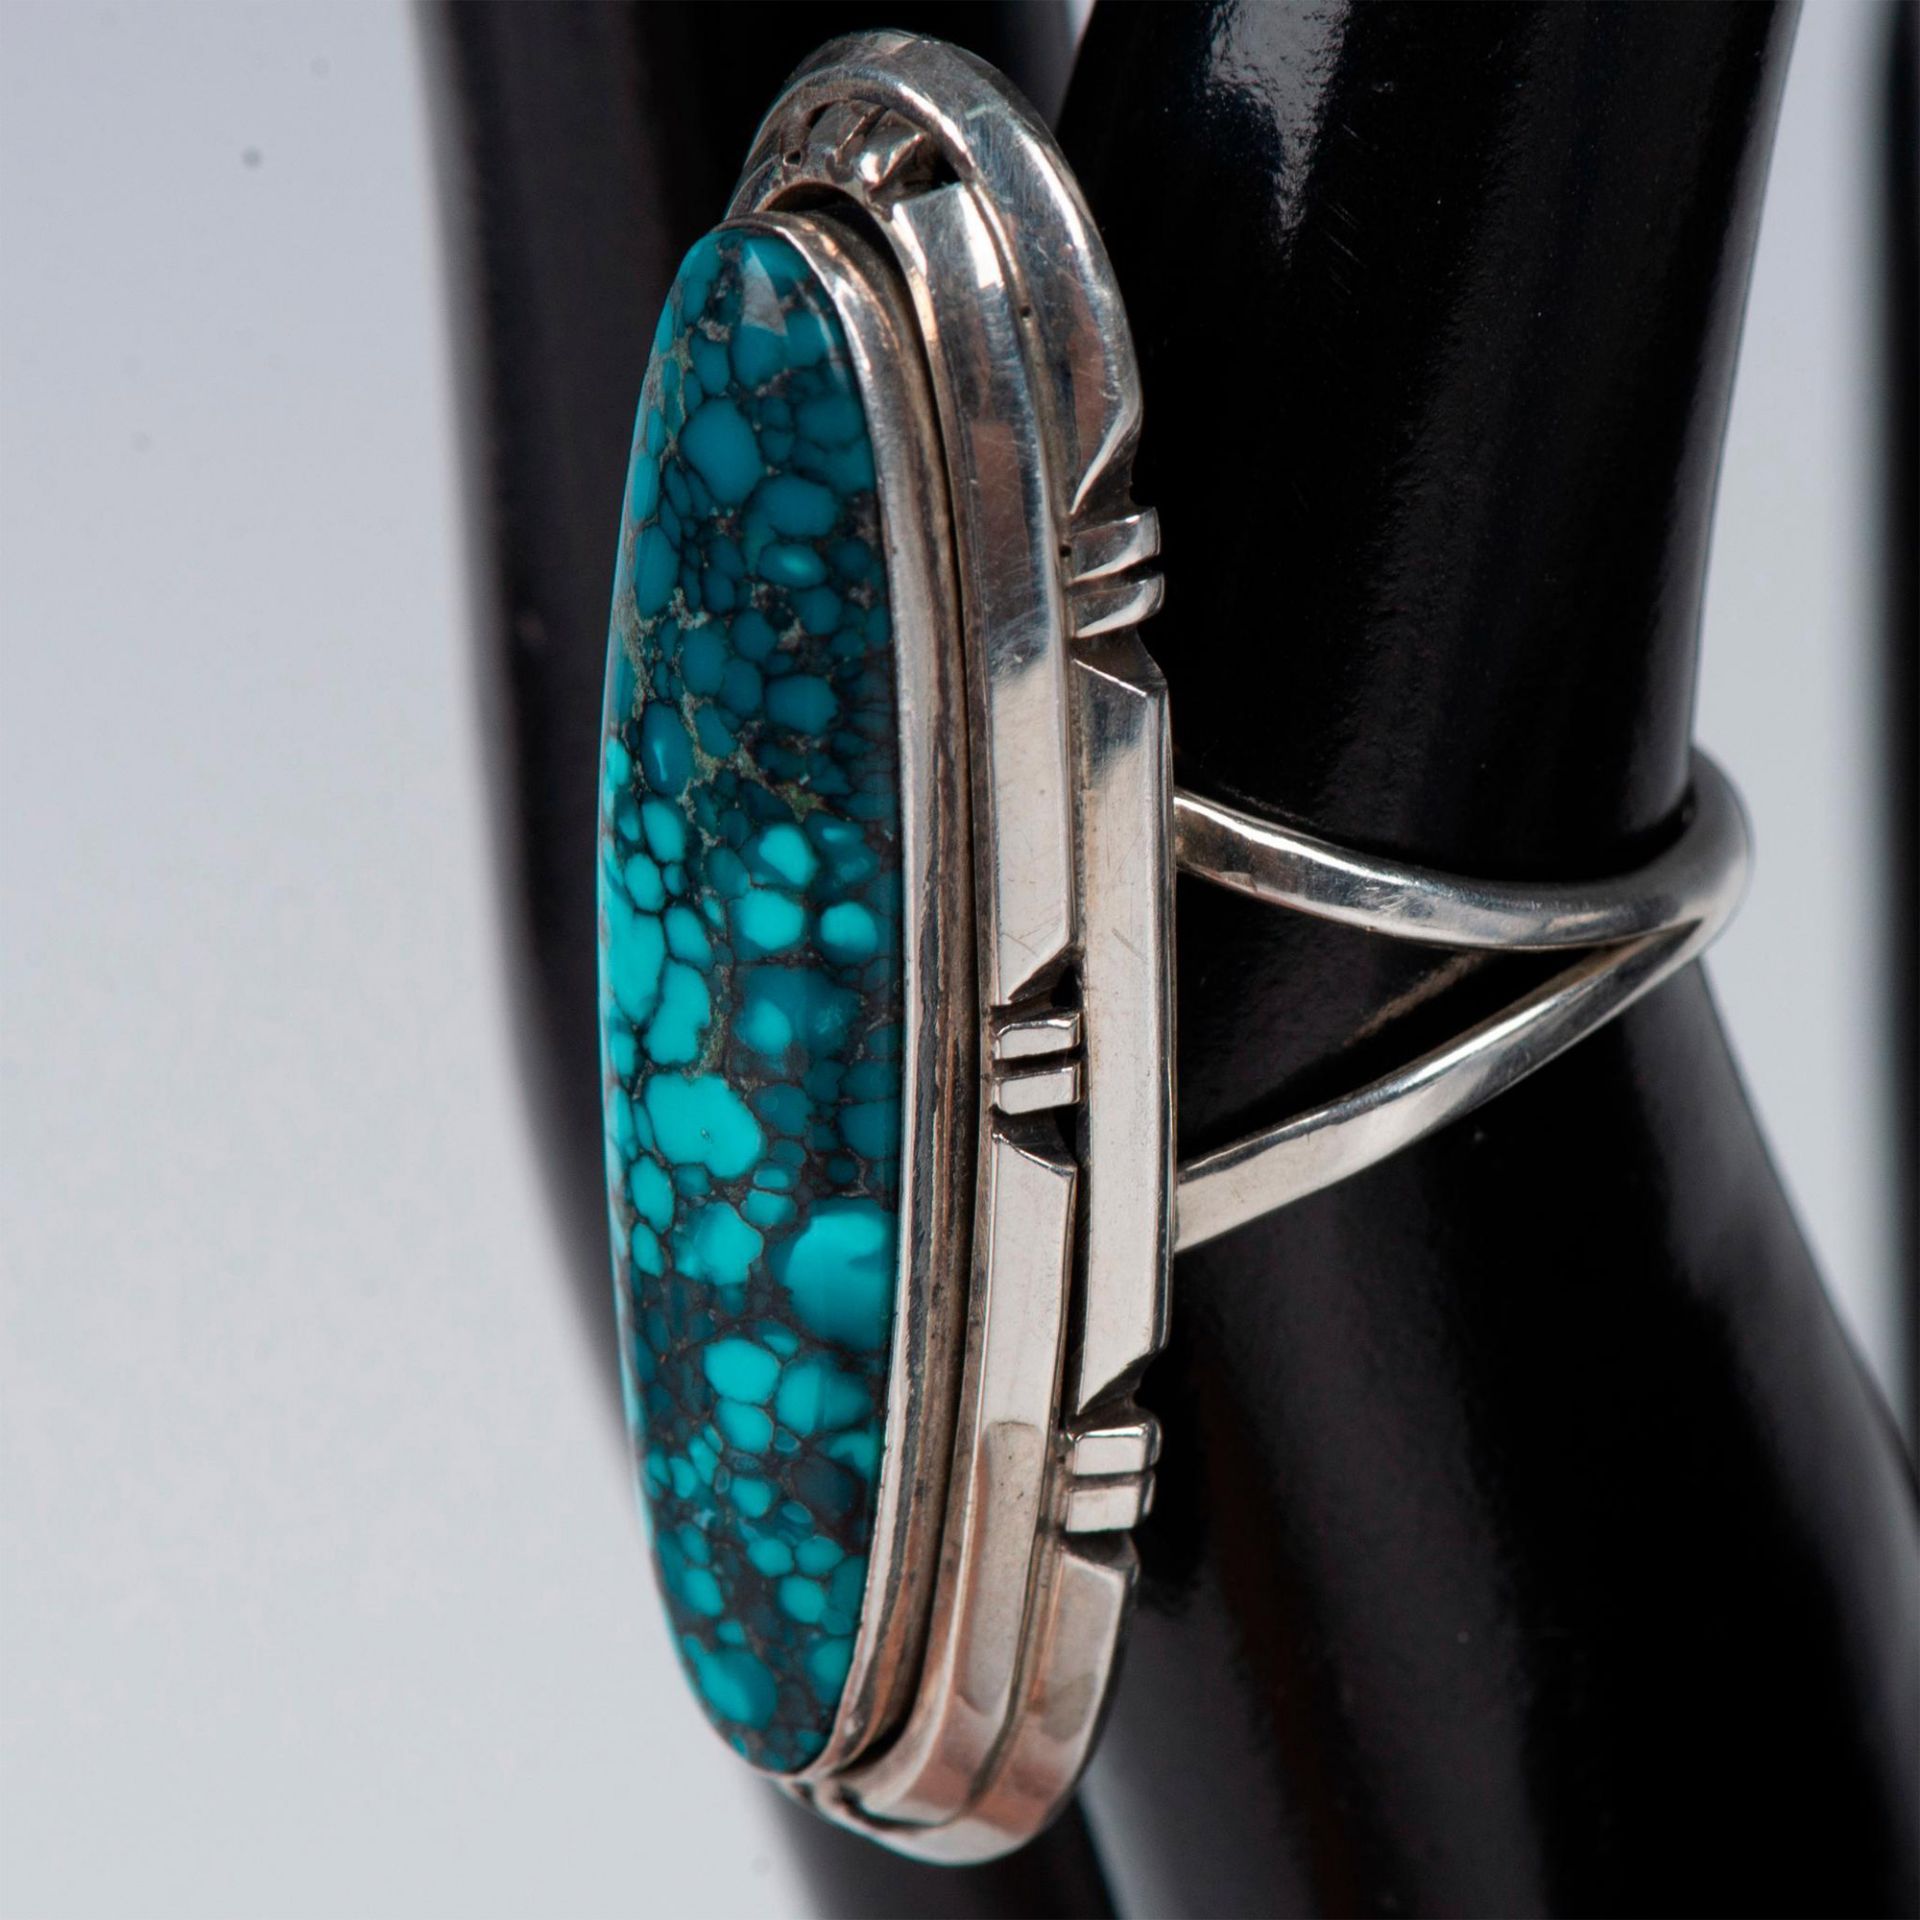 B. Piaso Navajo Sterling Silver & Spiderweb Turquoise Ring - Image 3 of 6